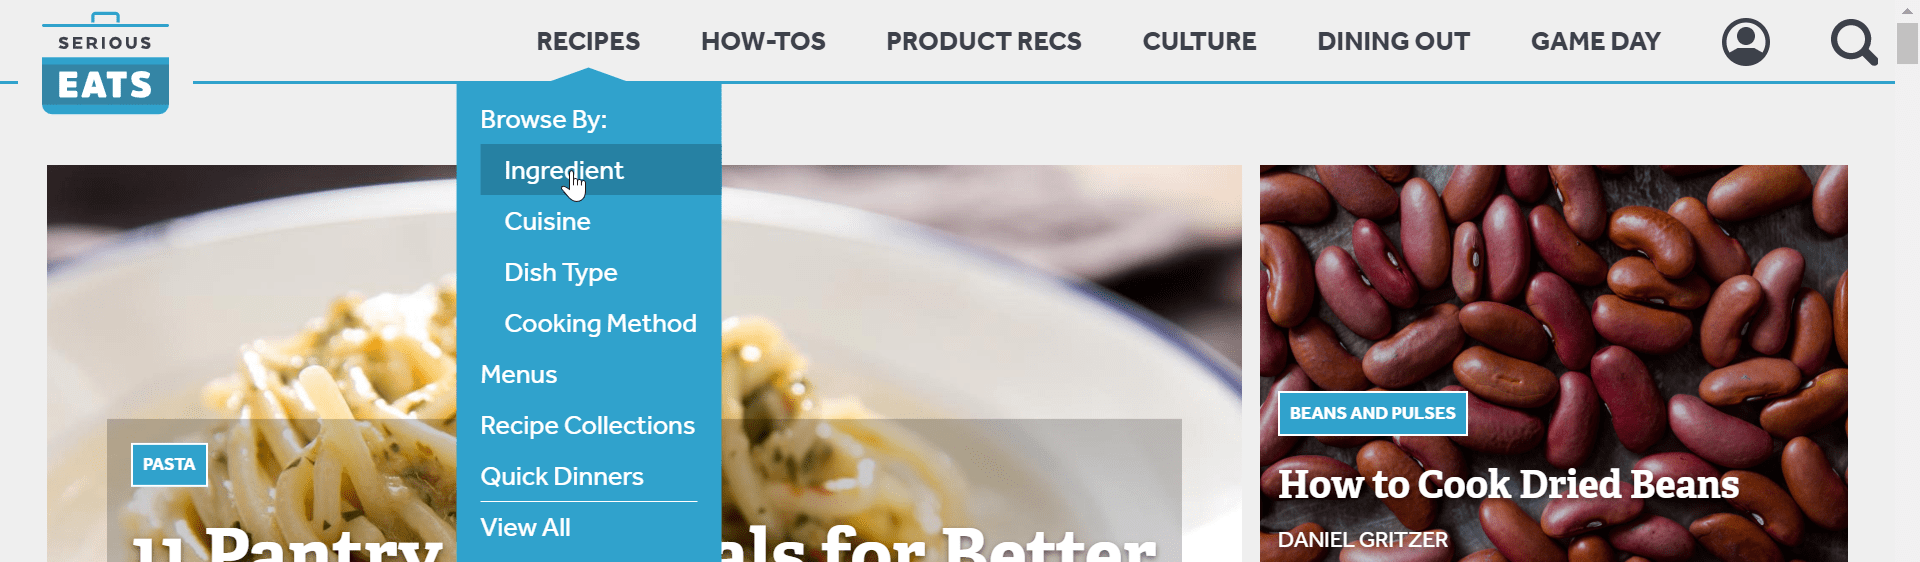 Serious Eats site home page